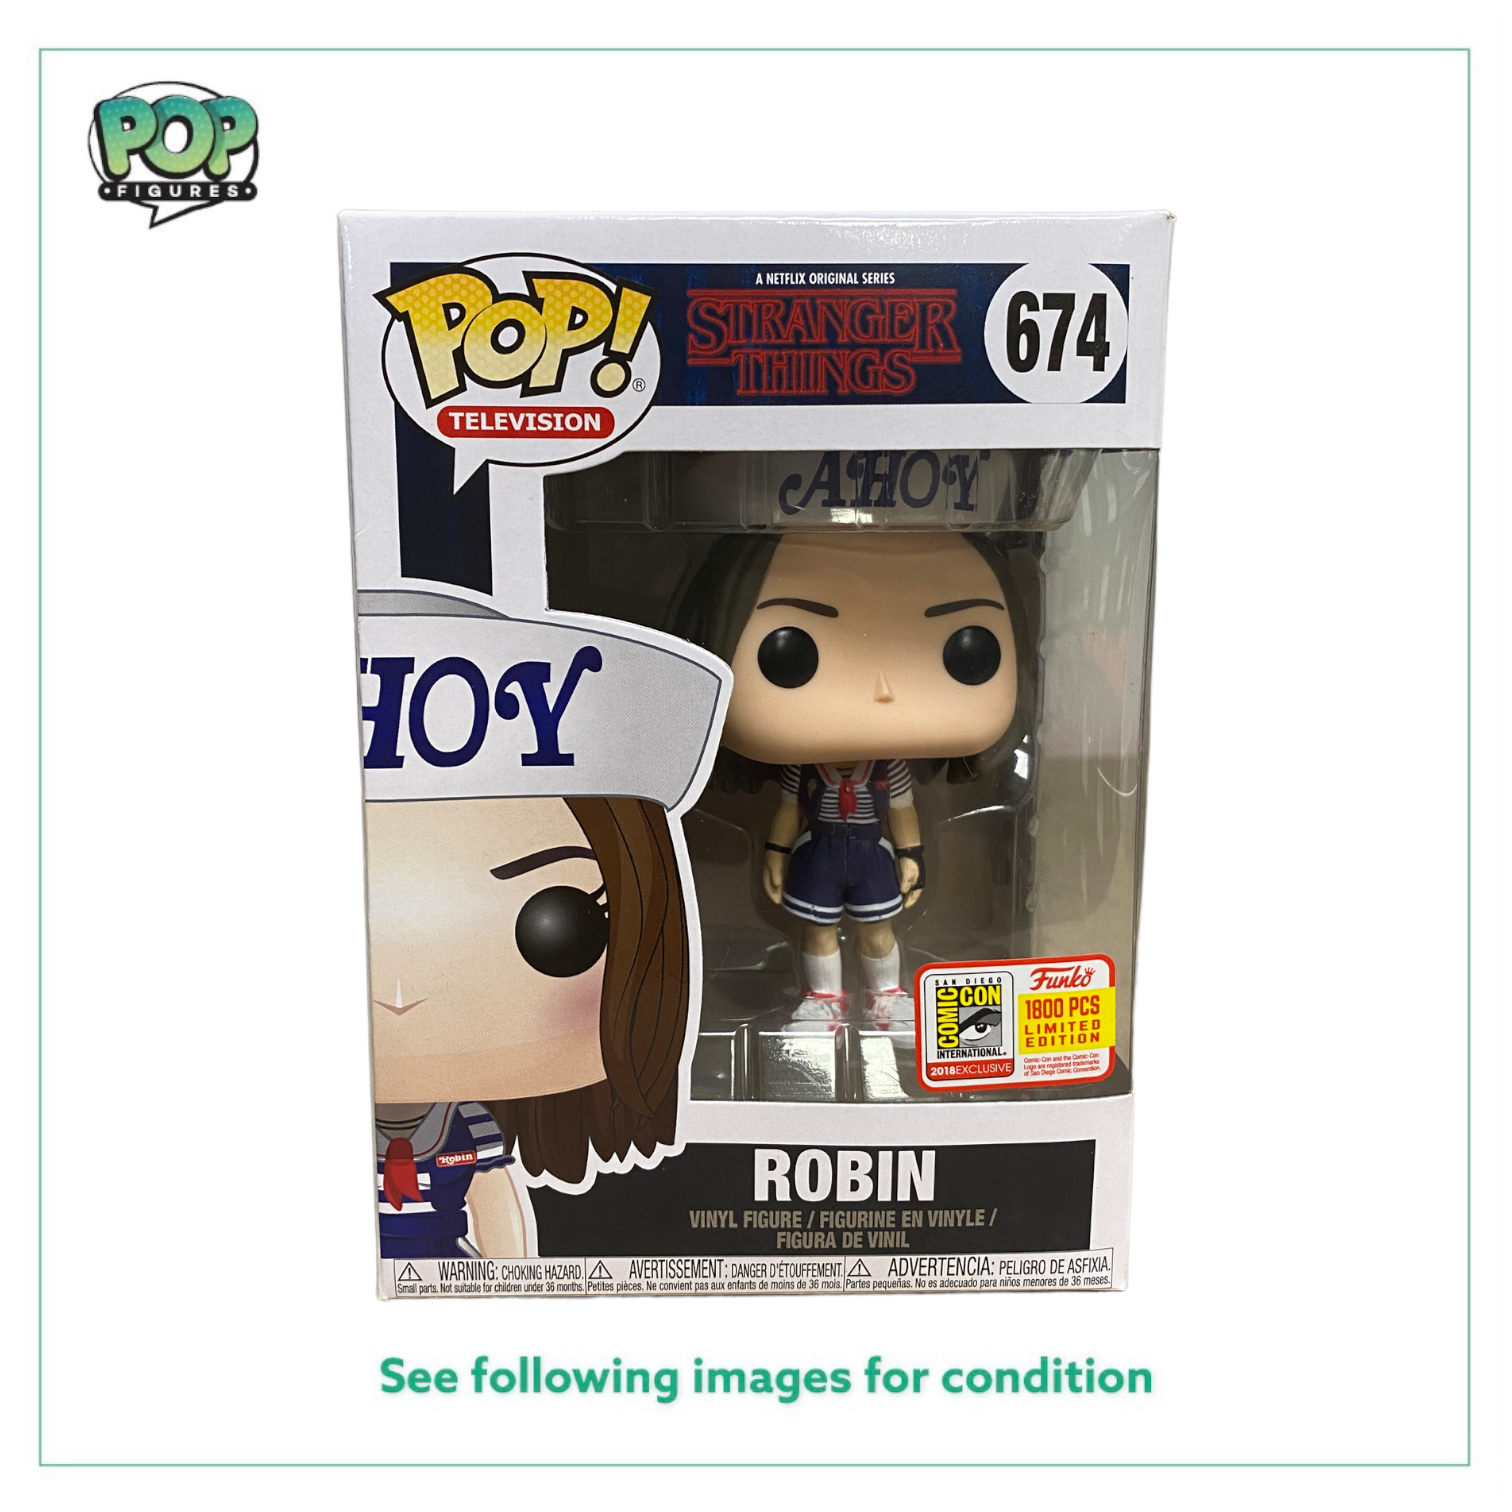 Robin #674 Funko Pop! - Stranger Things - SDCC 2018 Exclusive LE1800 Pcs - Condition 8.5/10